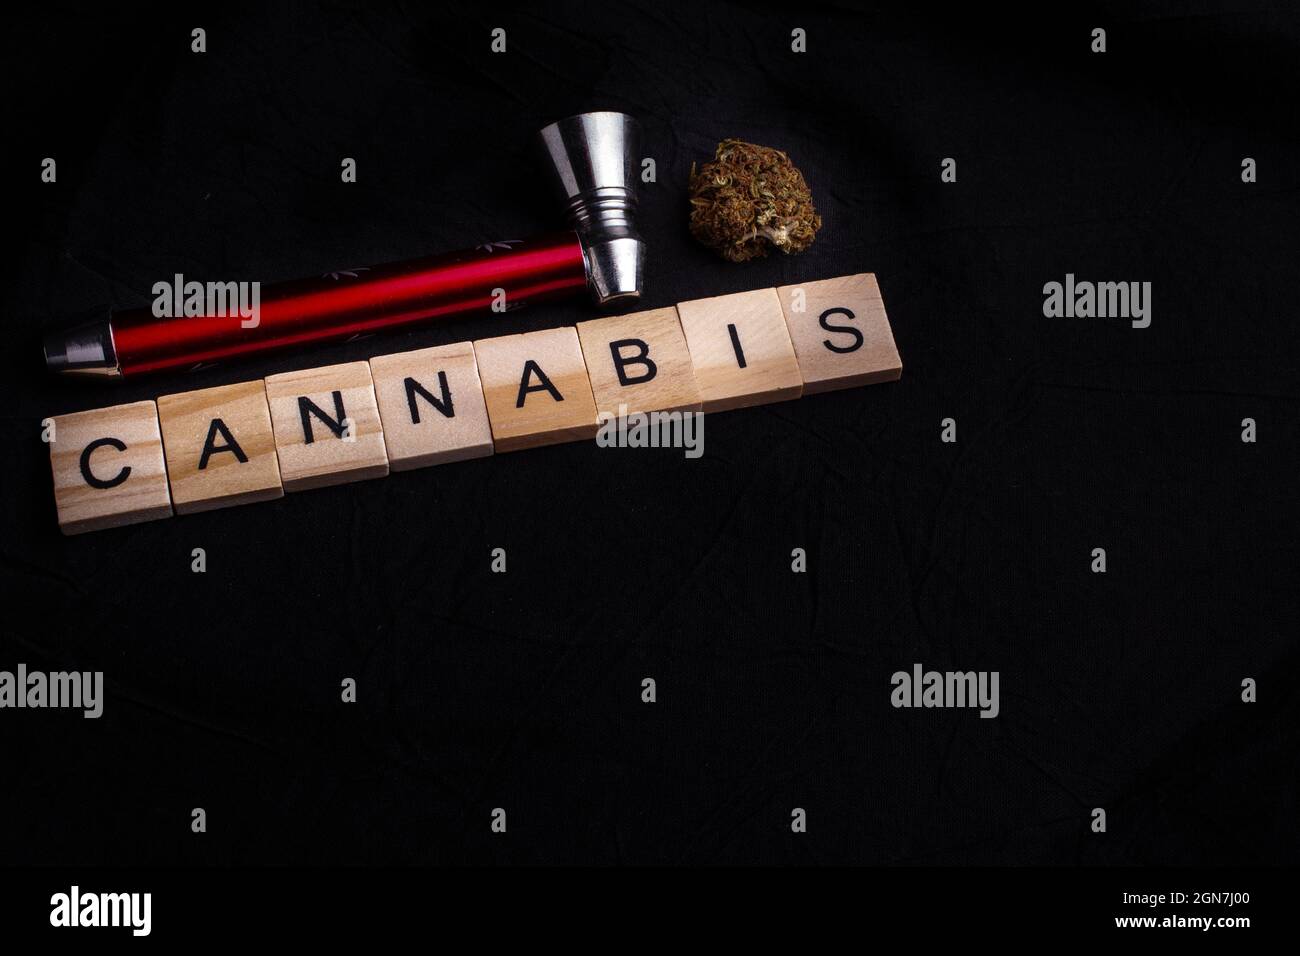 Close-Up Of Cannabis bud With Pipe, black background and cannabis text. Cannabis legalisation. Stock Photo